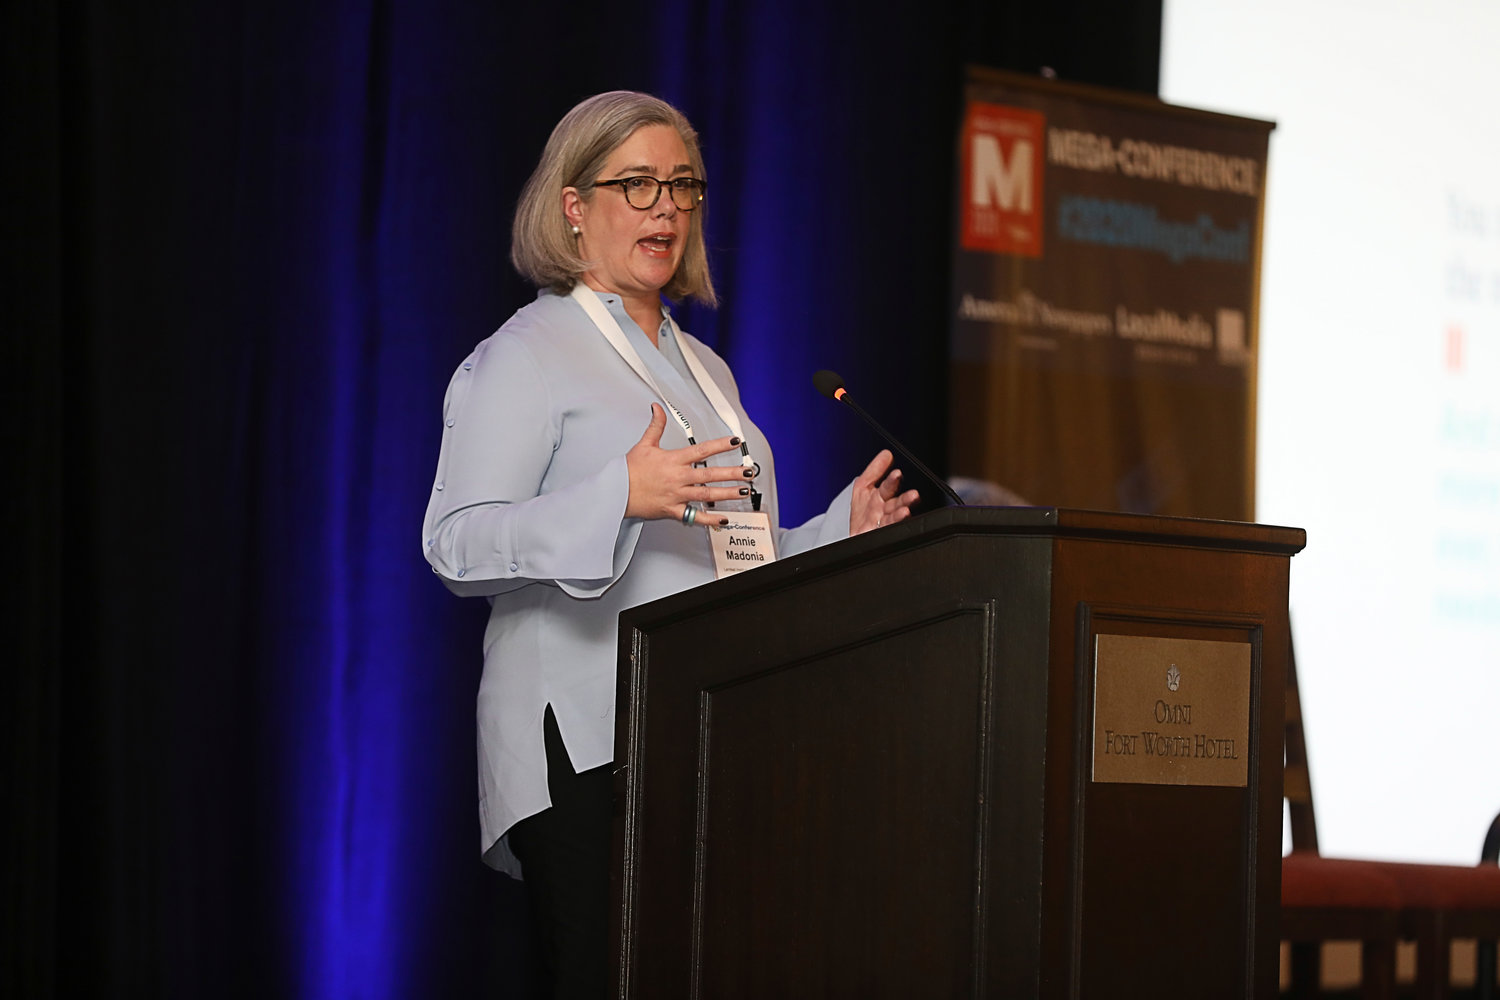 Annie Madonia of The Lenfest Institute on "Funding Outside the Box" at the 2020 Mega-Conference. (Photo by Bob Booth)